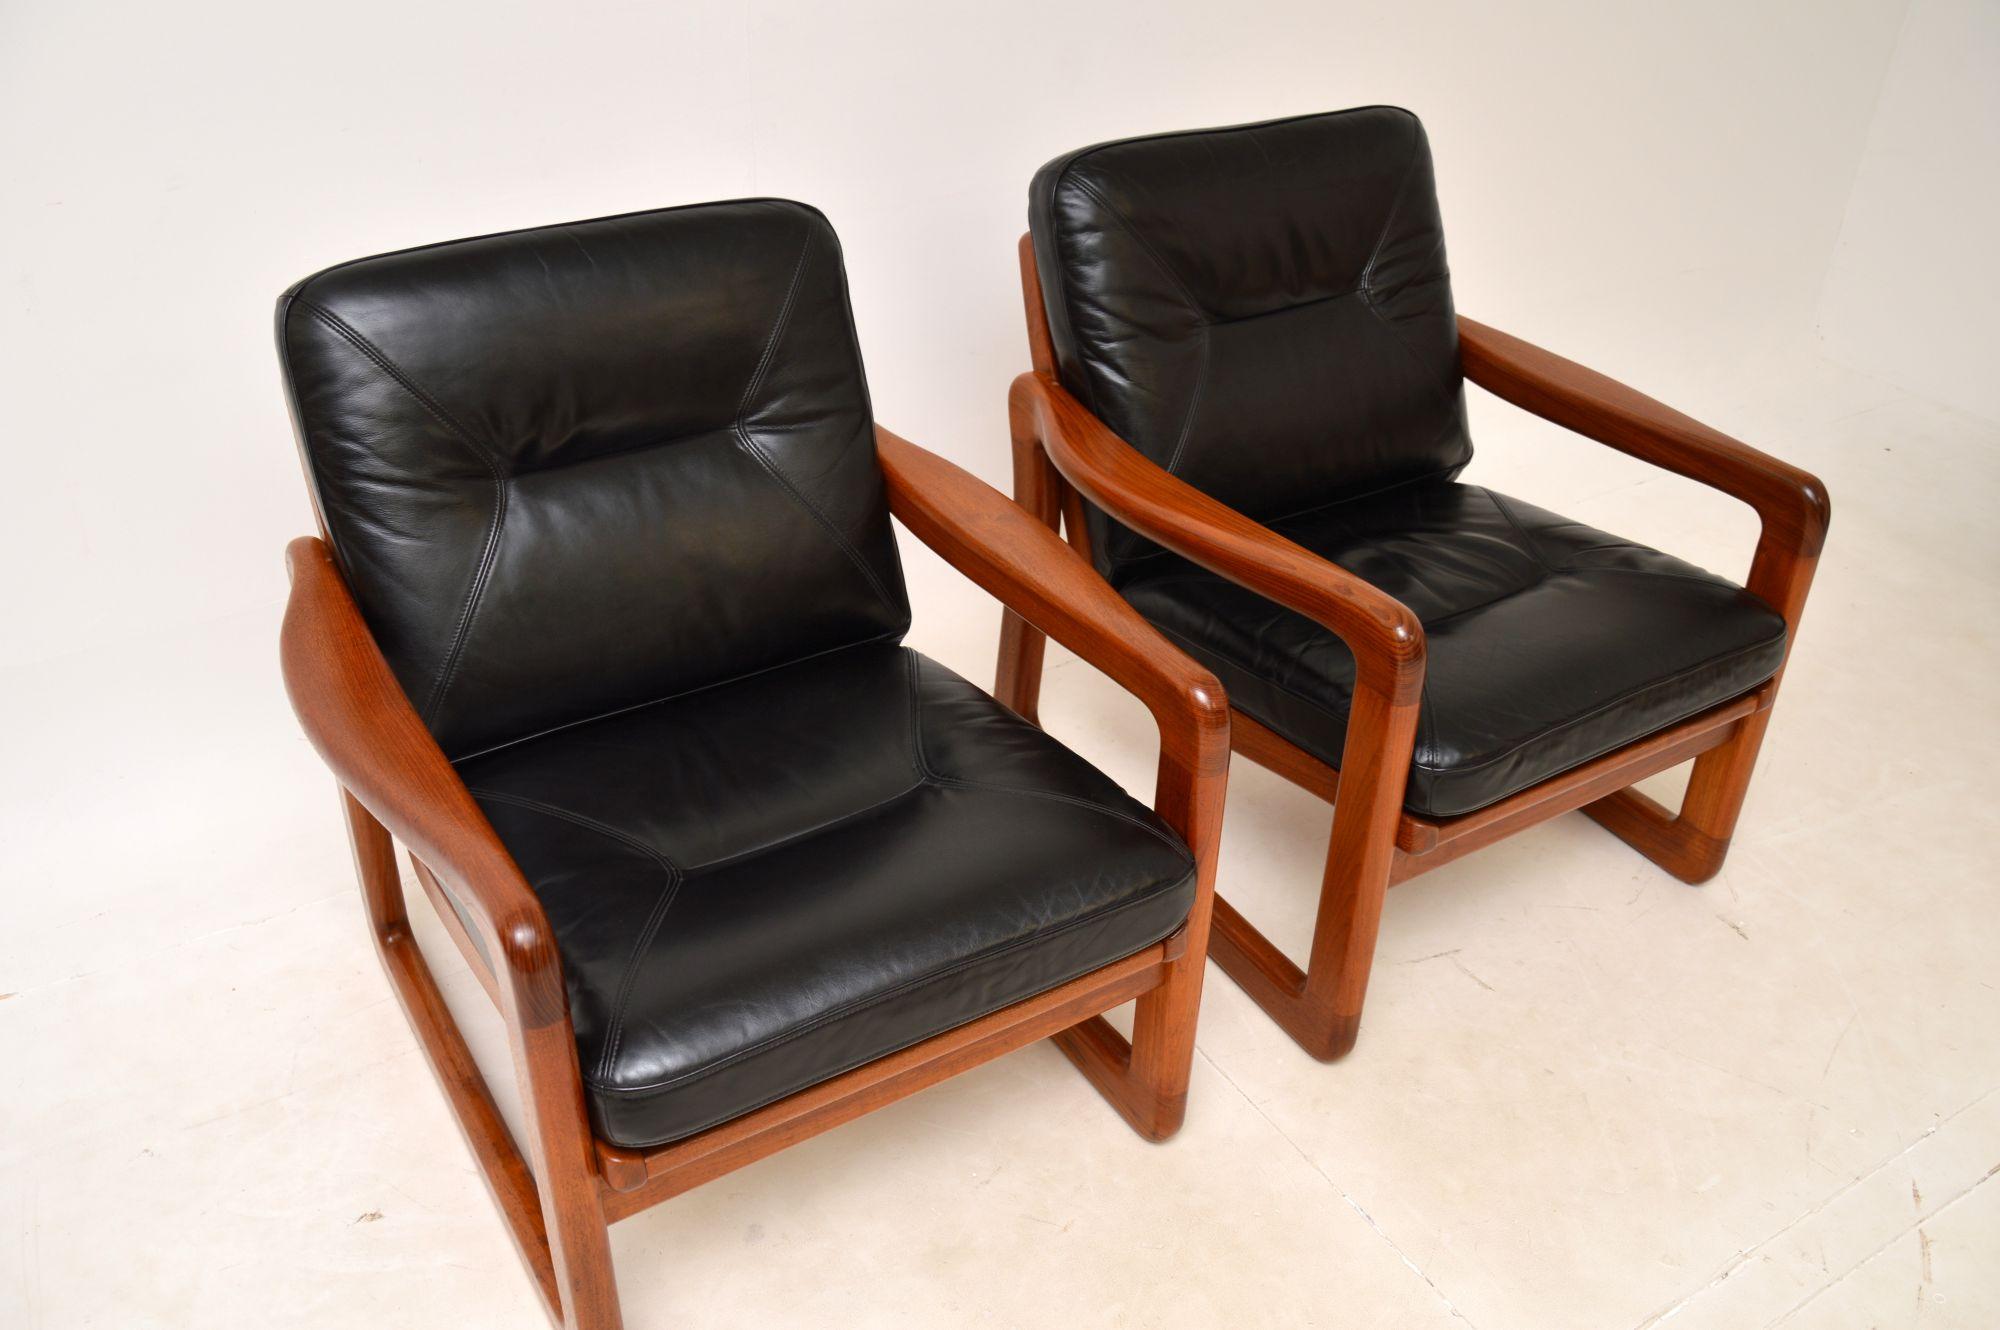 1970s Pair of Vintage Danish Teak & Leather Armchairs For Sale 3